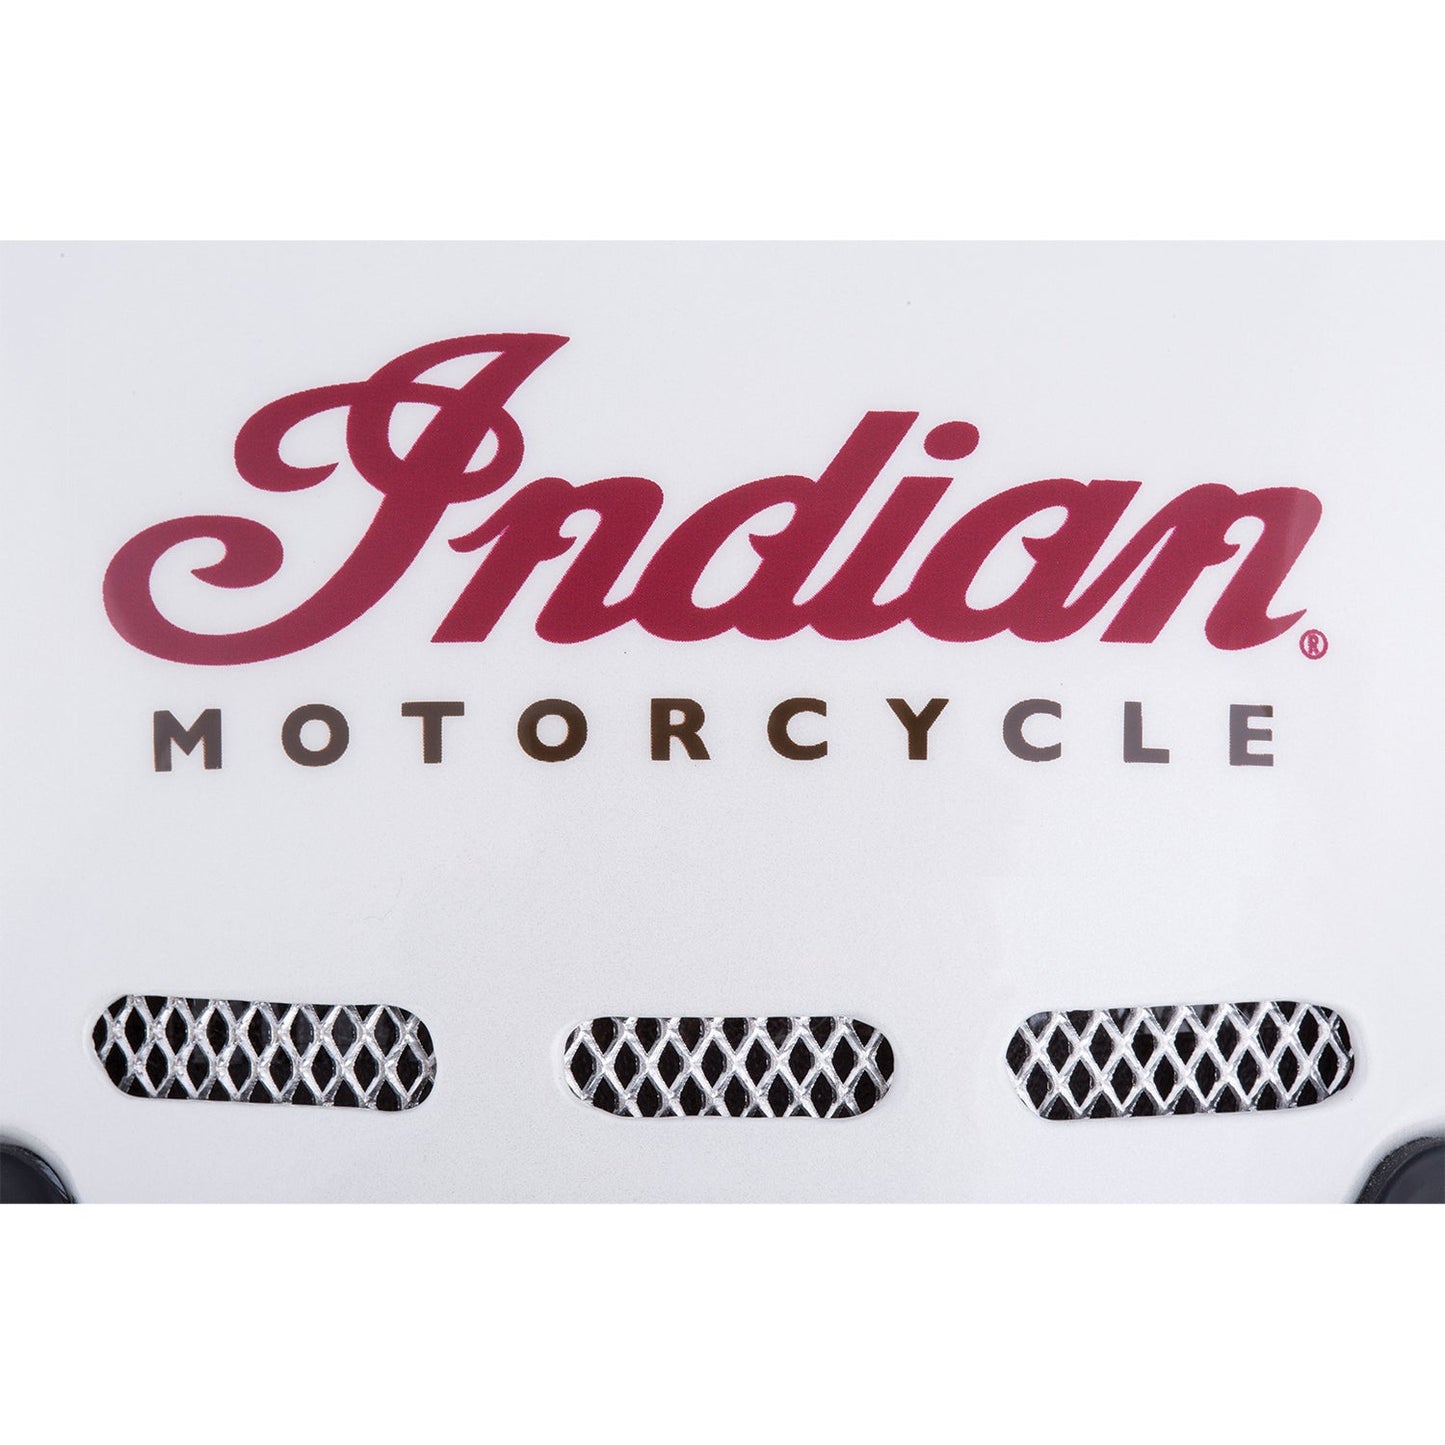 Retro Full Face Helmet with Stripes -White by Indian MotorcycleÂ®